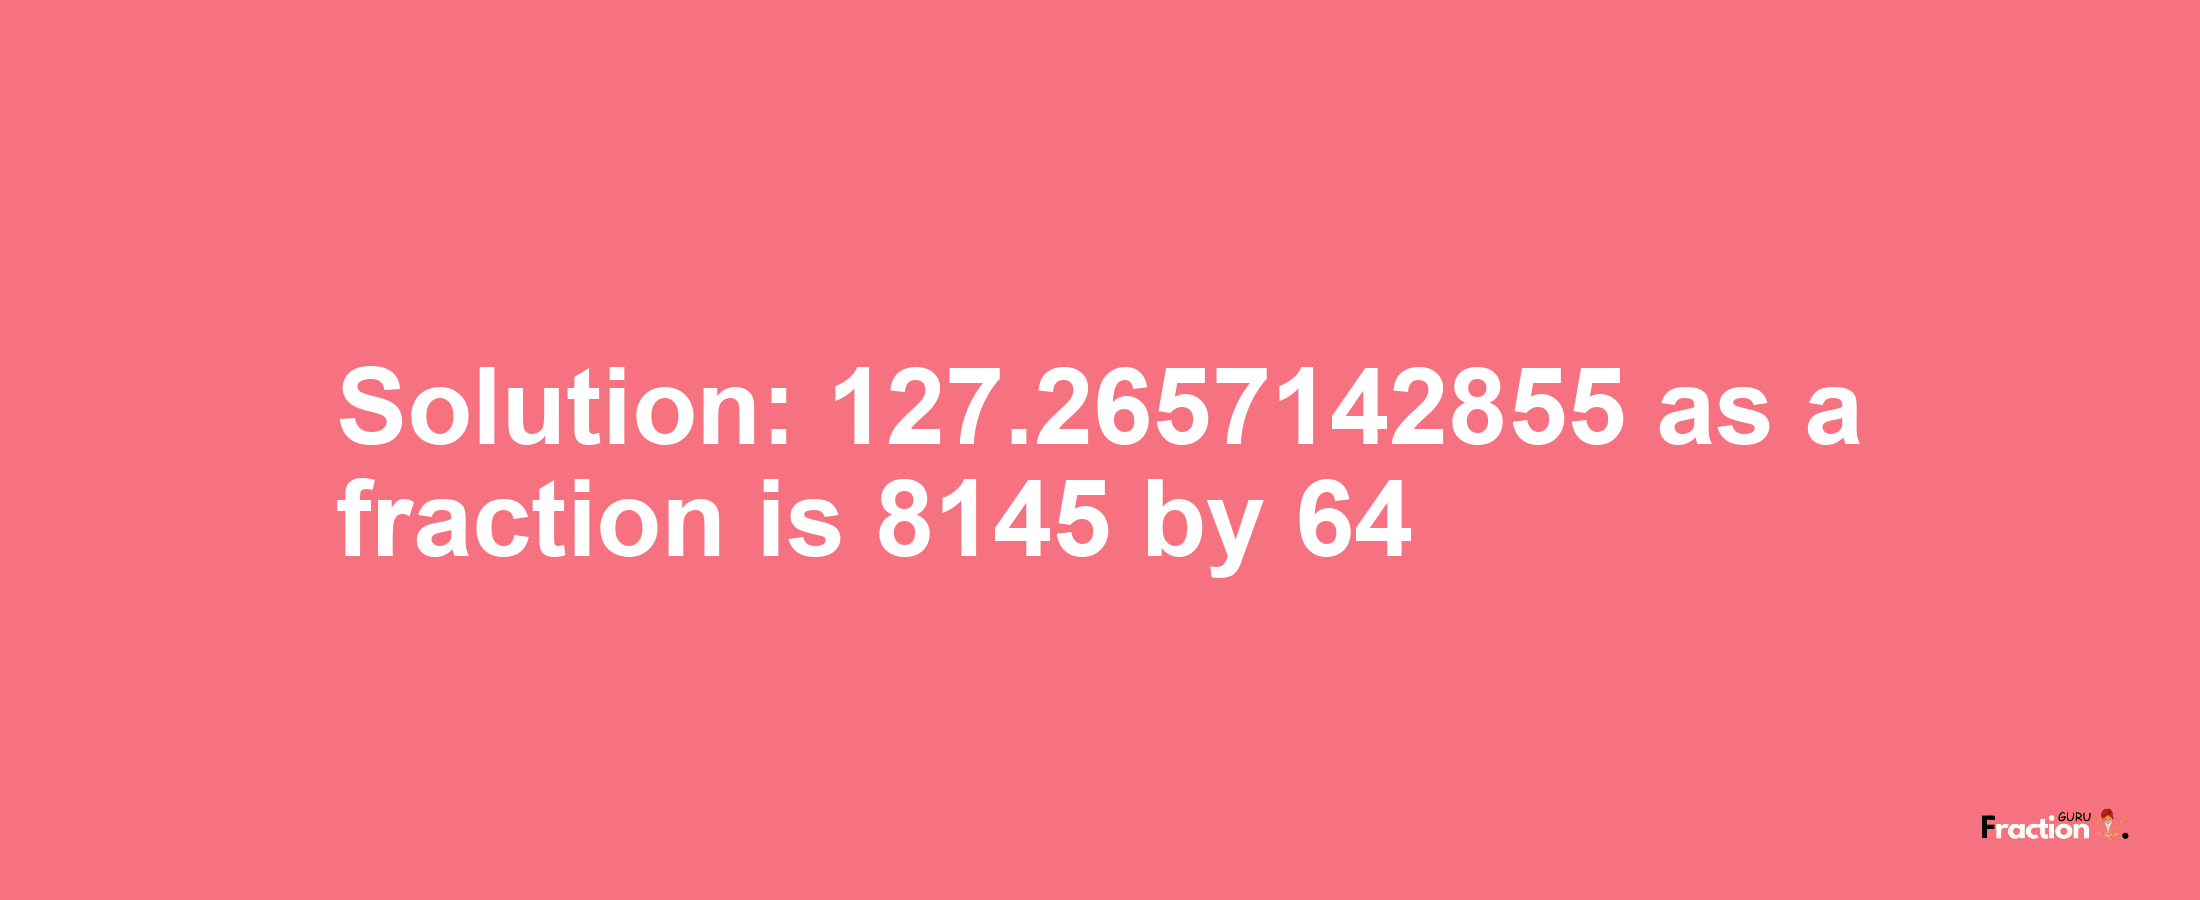 Solution:127.2657142855 as a fraction is 8145/64